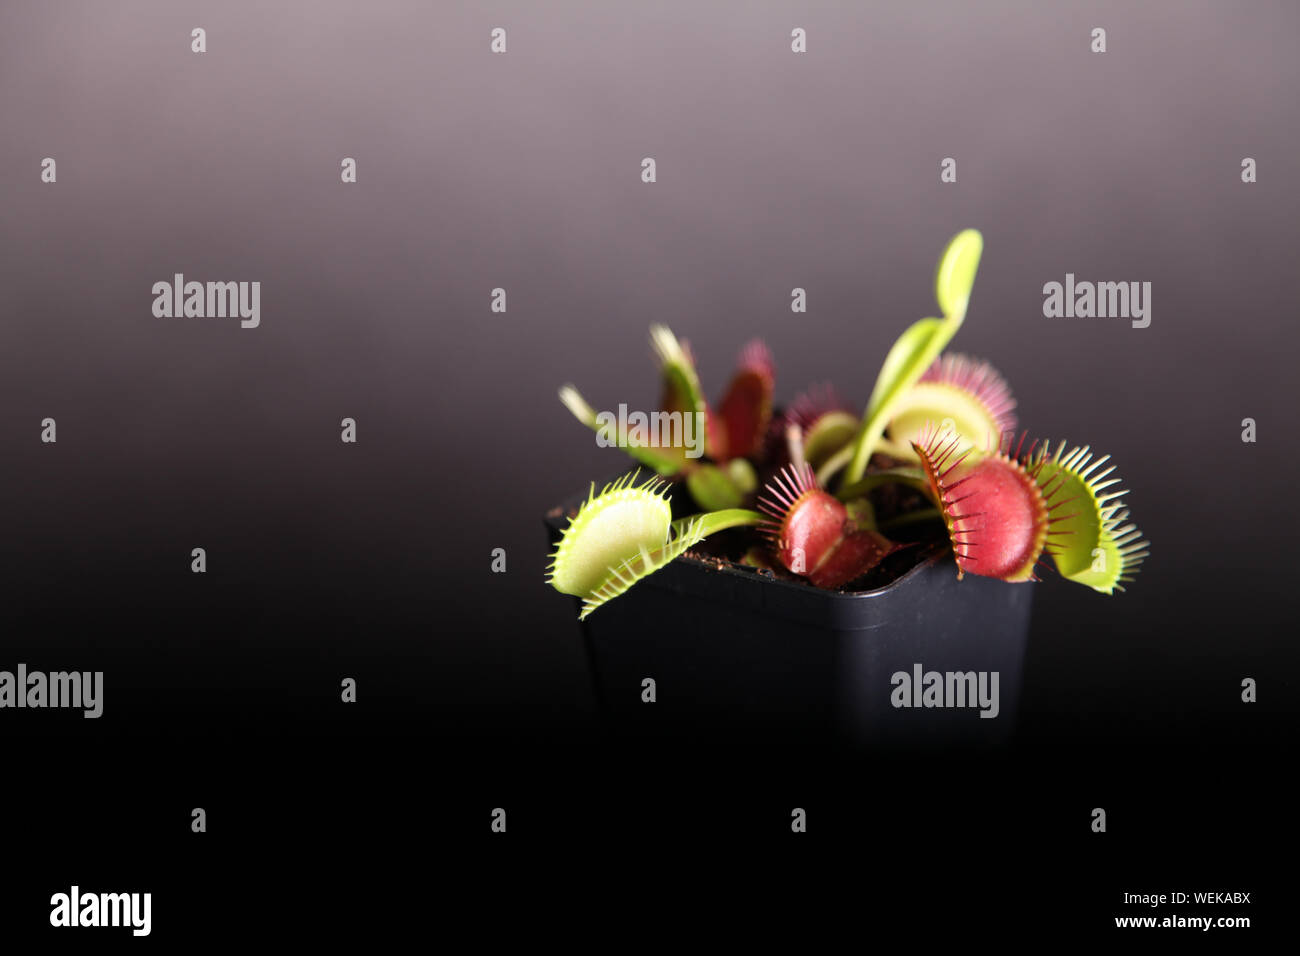 Venus fly trap (Dionaea Muscipula) plant in pot isolated on black background with copy space Stock Photo